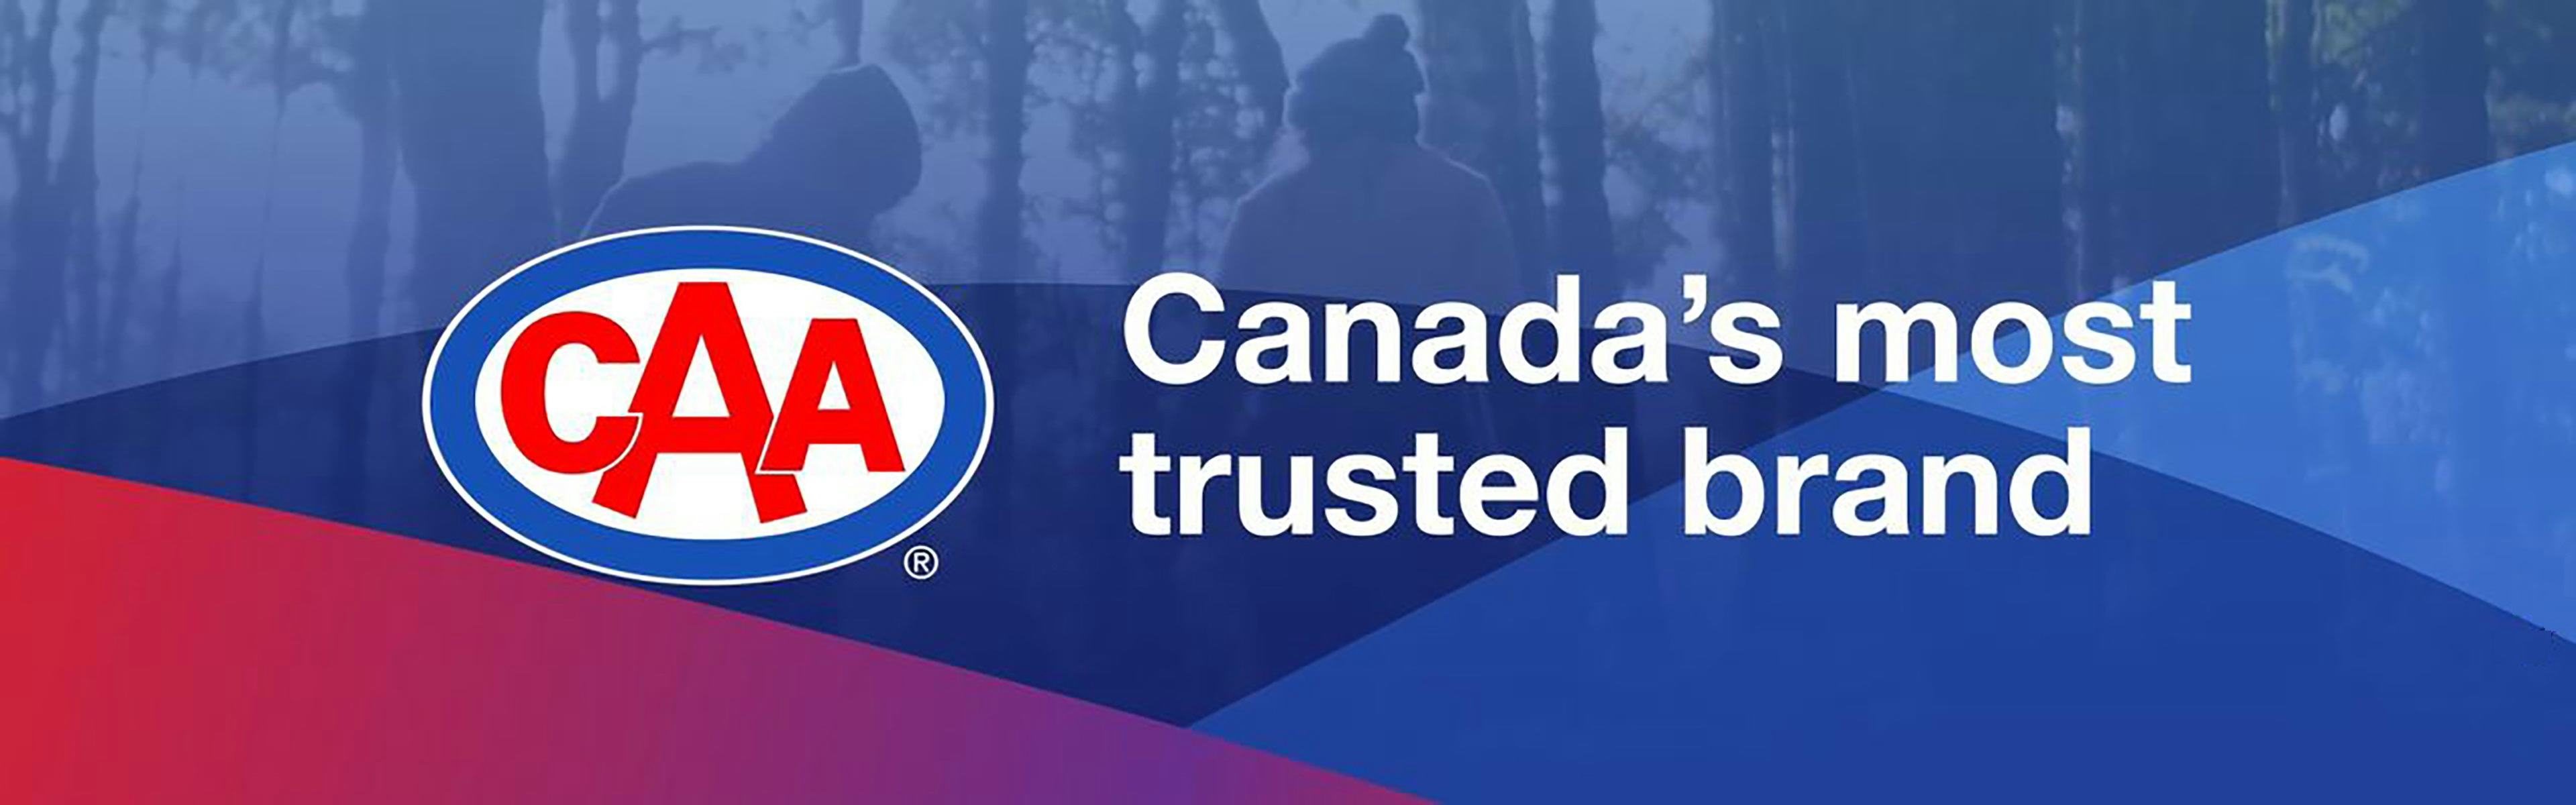 CAA named most trusted brand in Canada two years running.